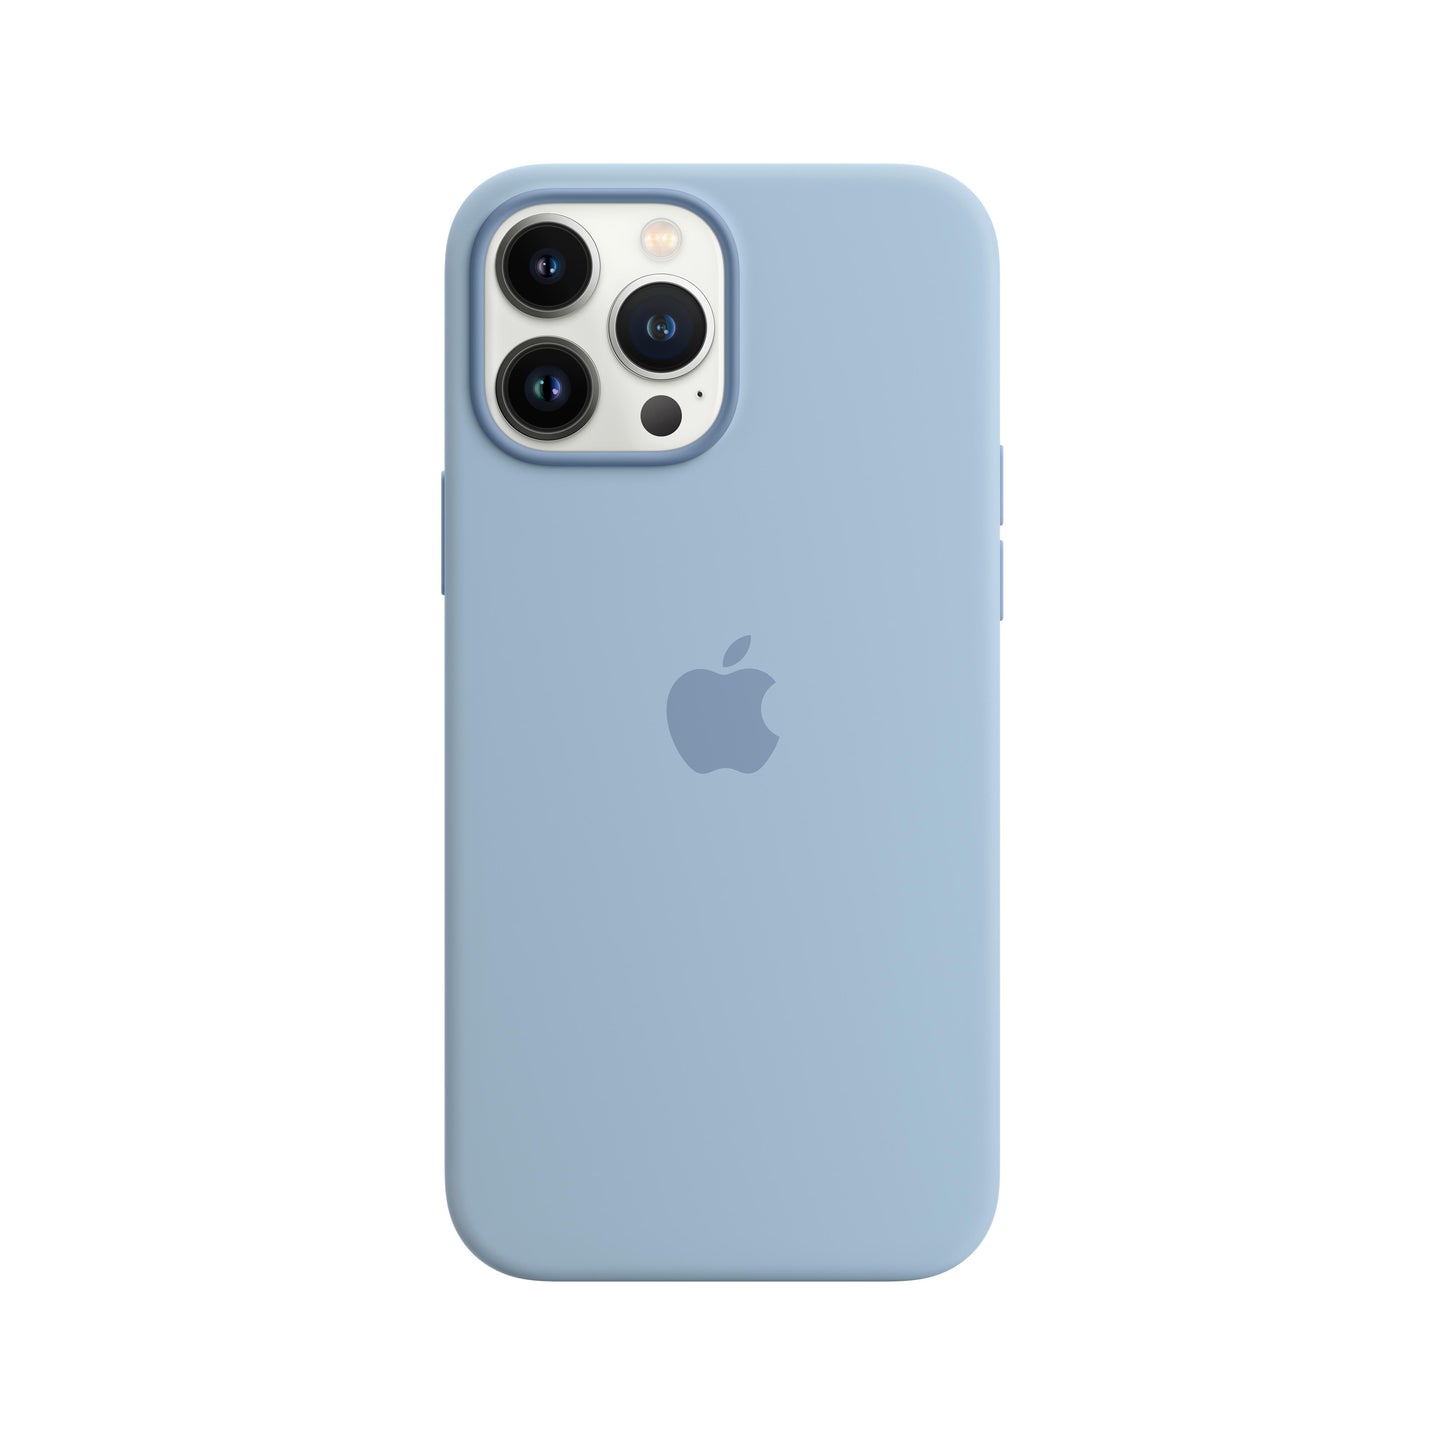 iPhone 13 Pro Max Silicone Case with MagSafe - Blue Fog